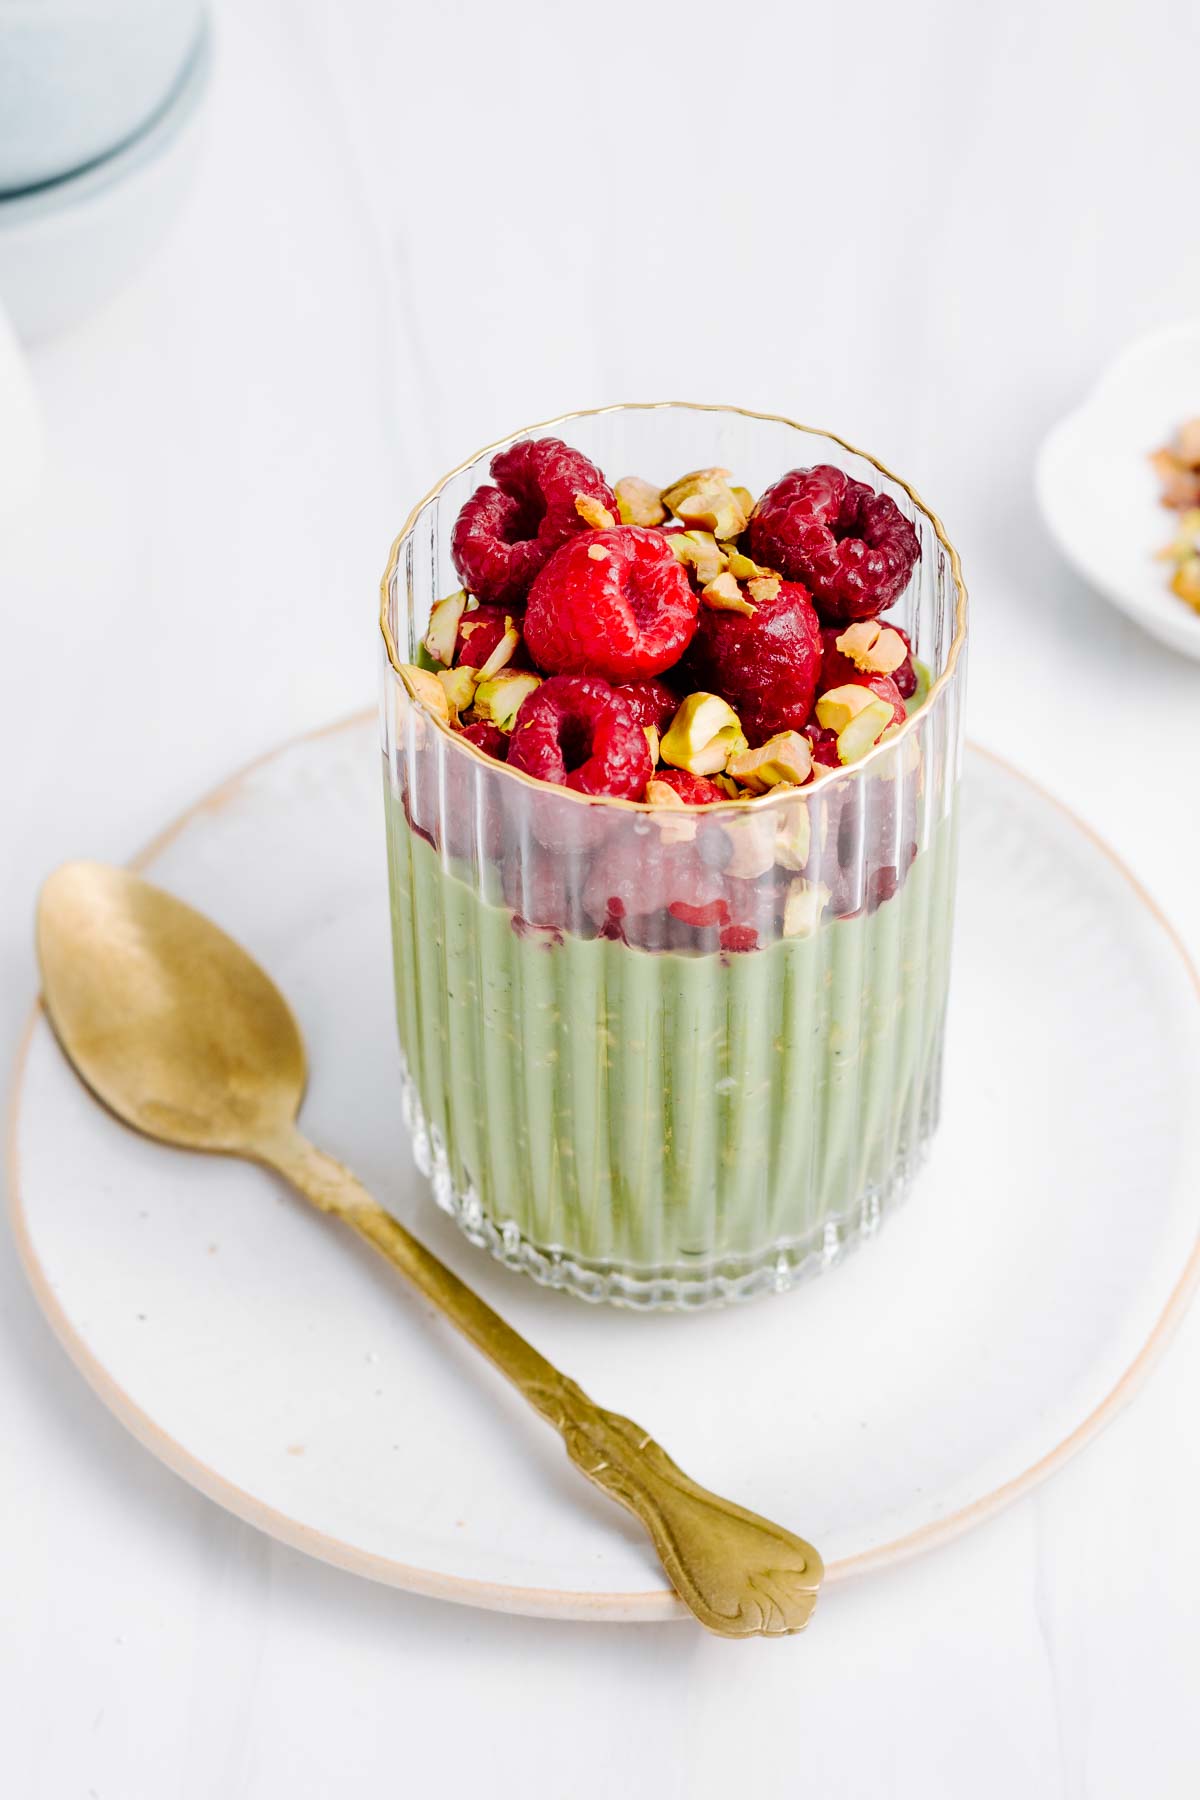 A glass filled with green matcha overnight oats and with raspberries and chopped pistachios on top on a white plate next to a golden spoon.